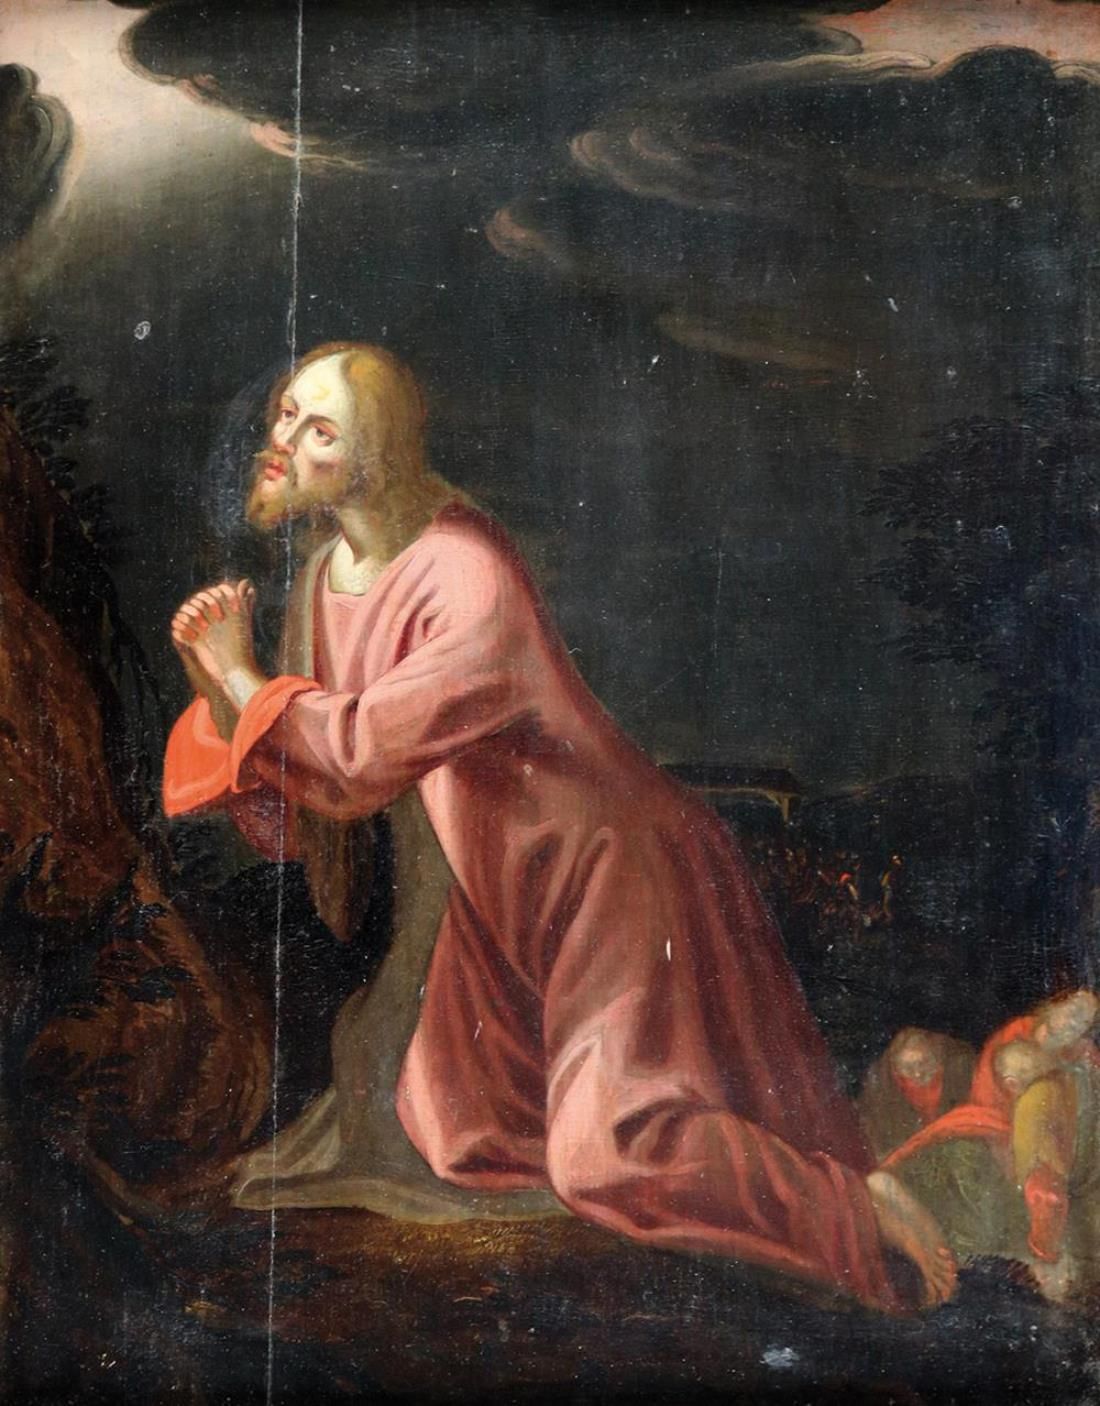 Anonym. (17th century, southern German area). Christ praying on the Mount of Oli&hellip;